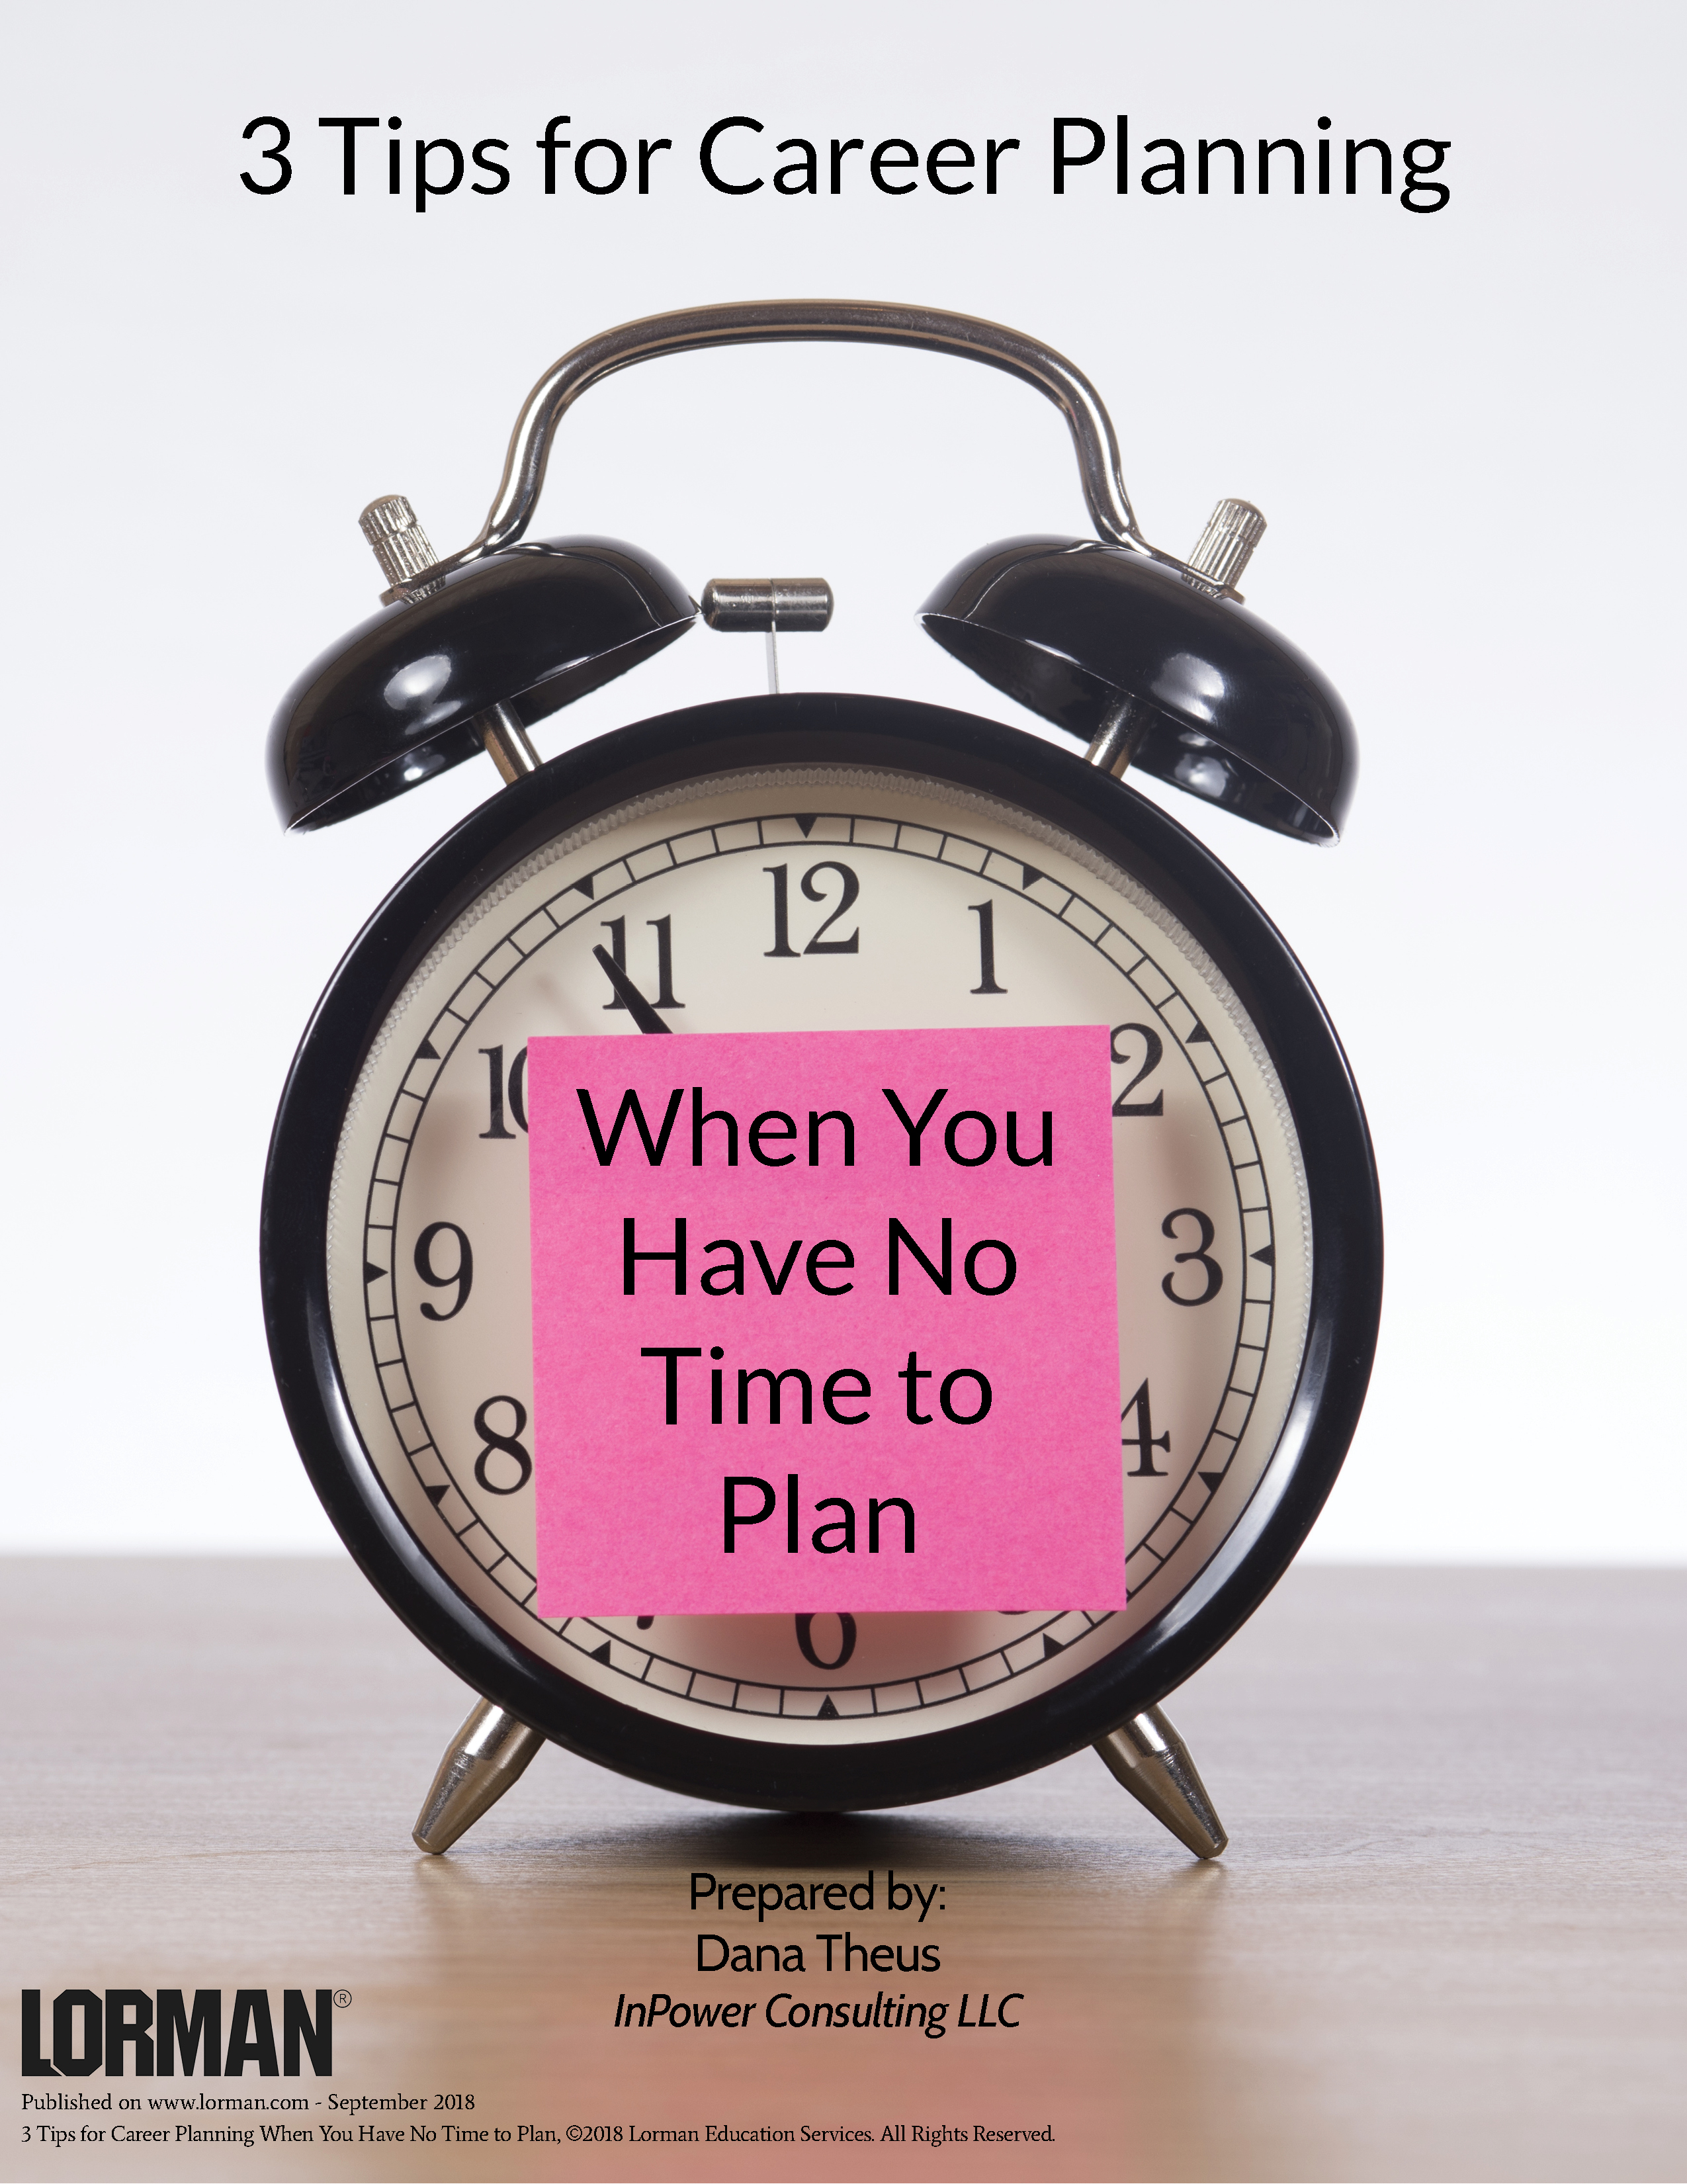 3 Tips for Career Planning When You Have No Time To Plan